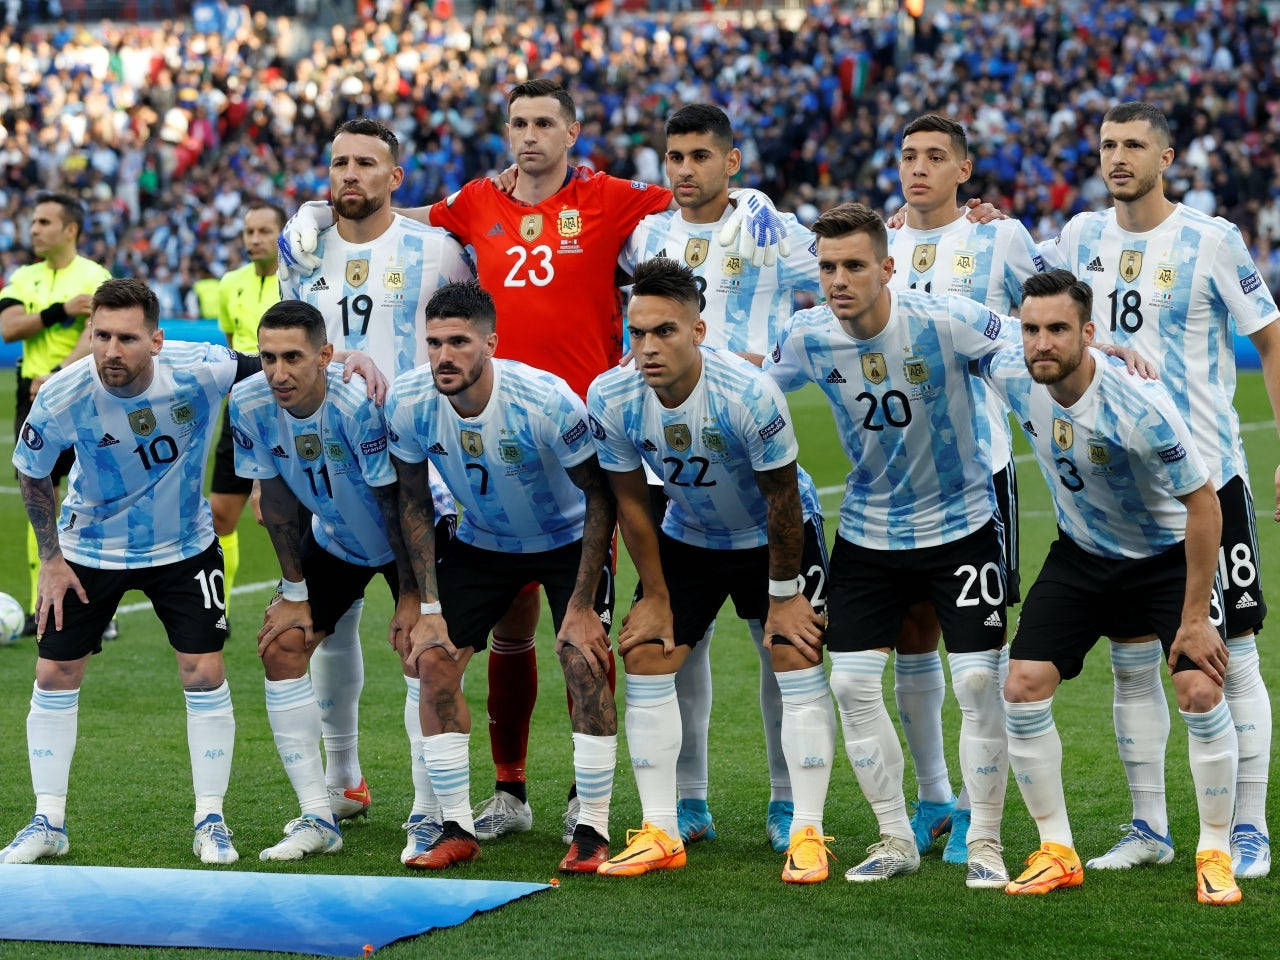 Download Argentina National Football Team Group Photo Wallpaper | Wallpapers .com